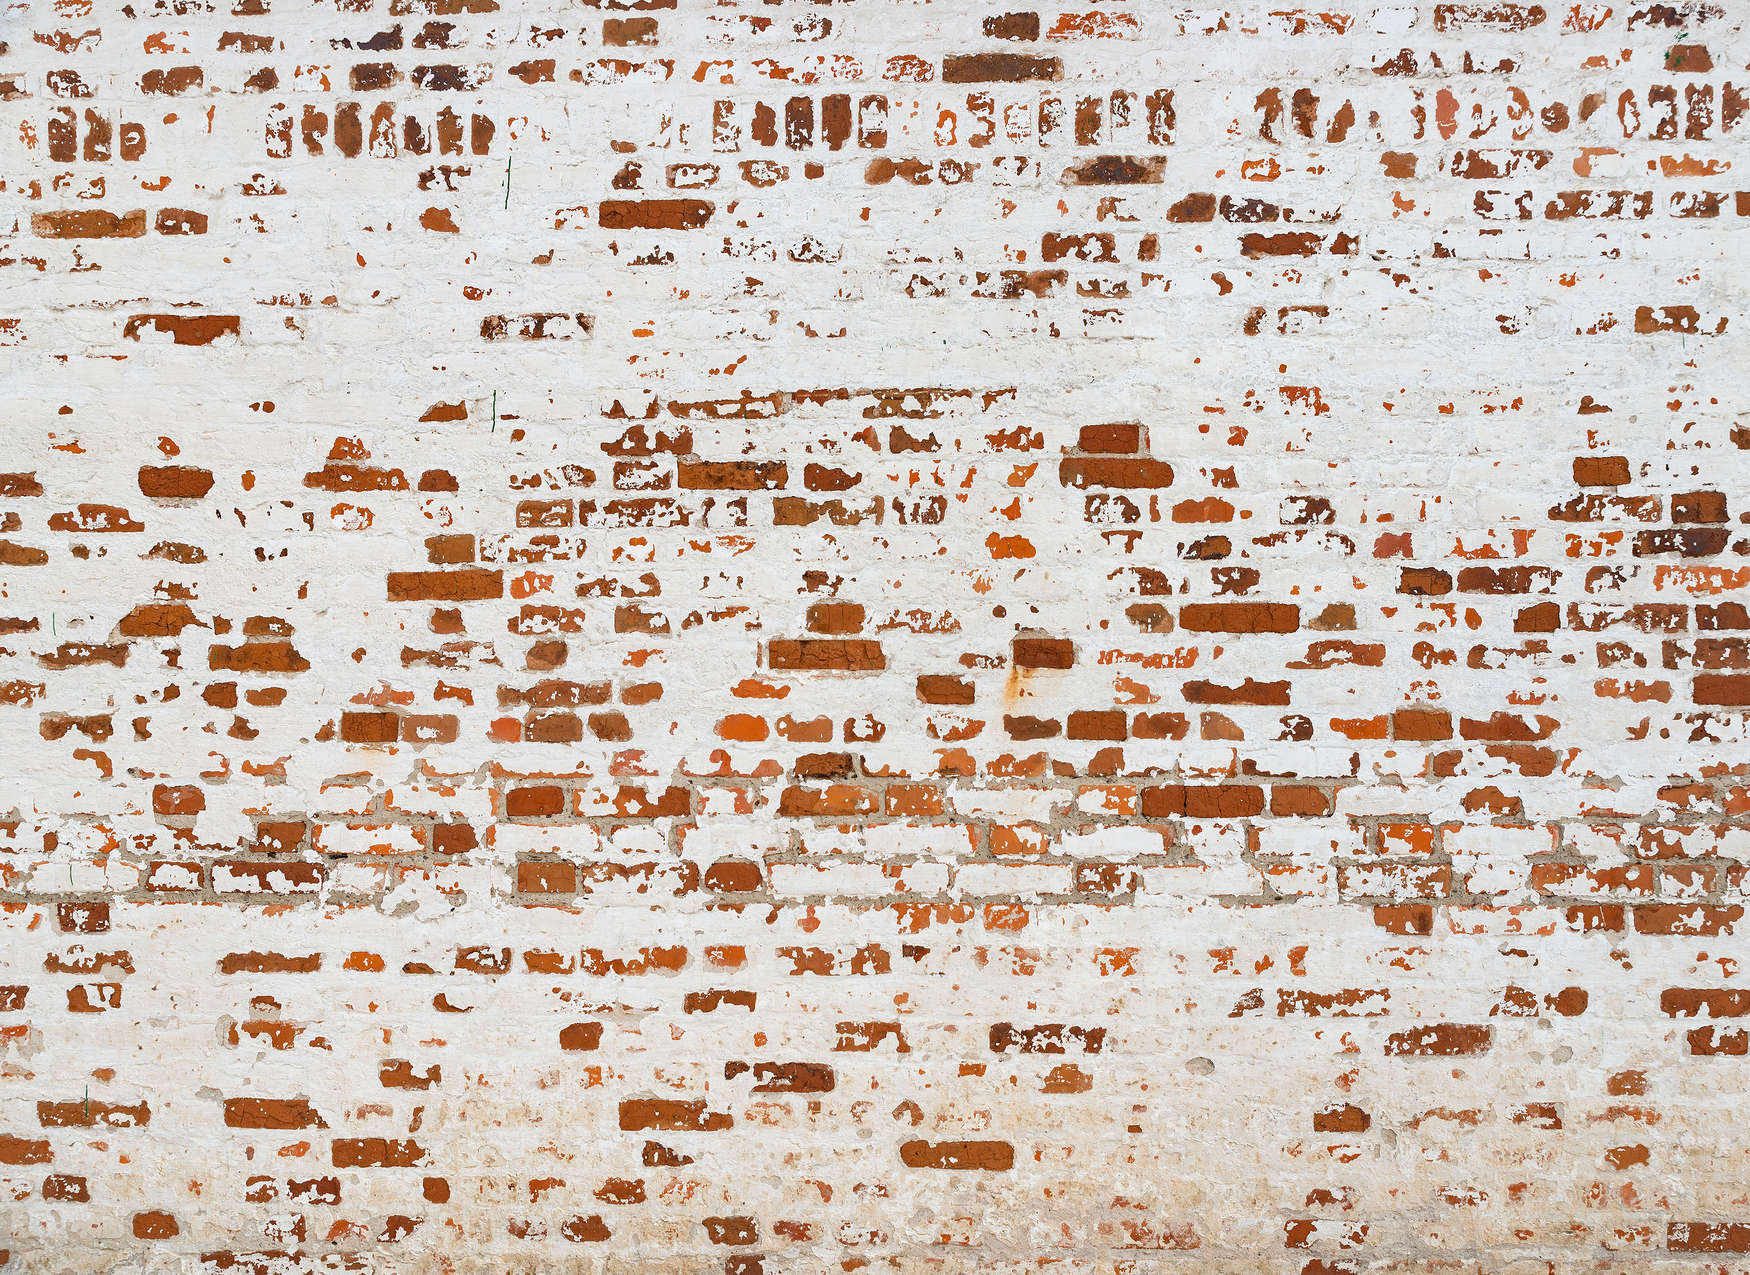             Photo wallpaper Brick Wall with 3D Effect - White, Brown, Red
        